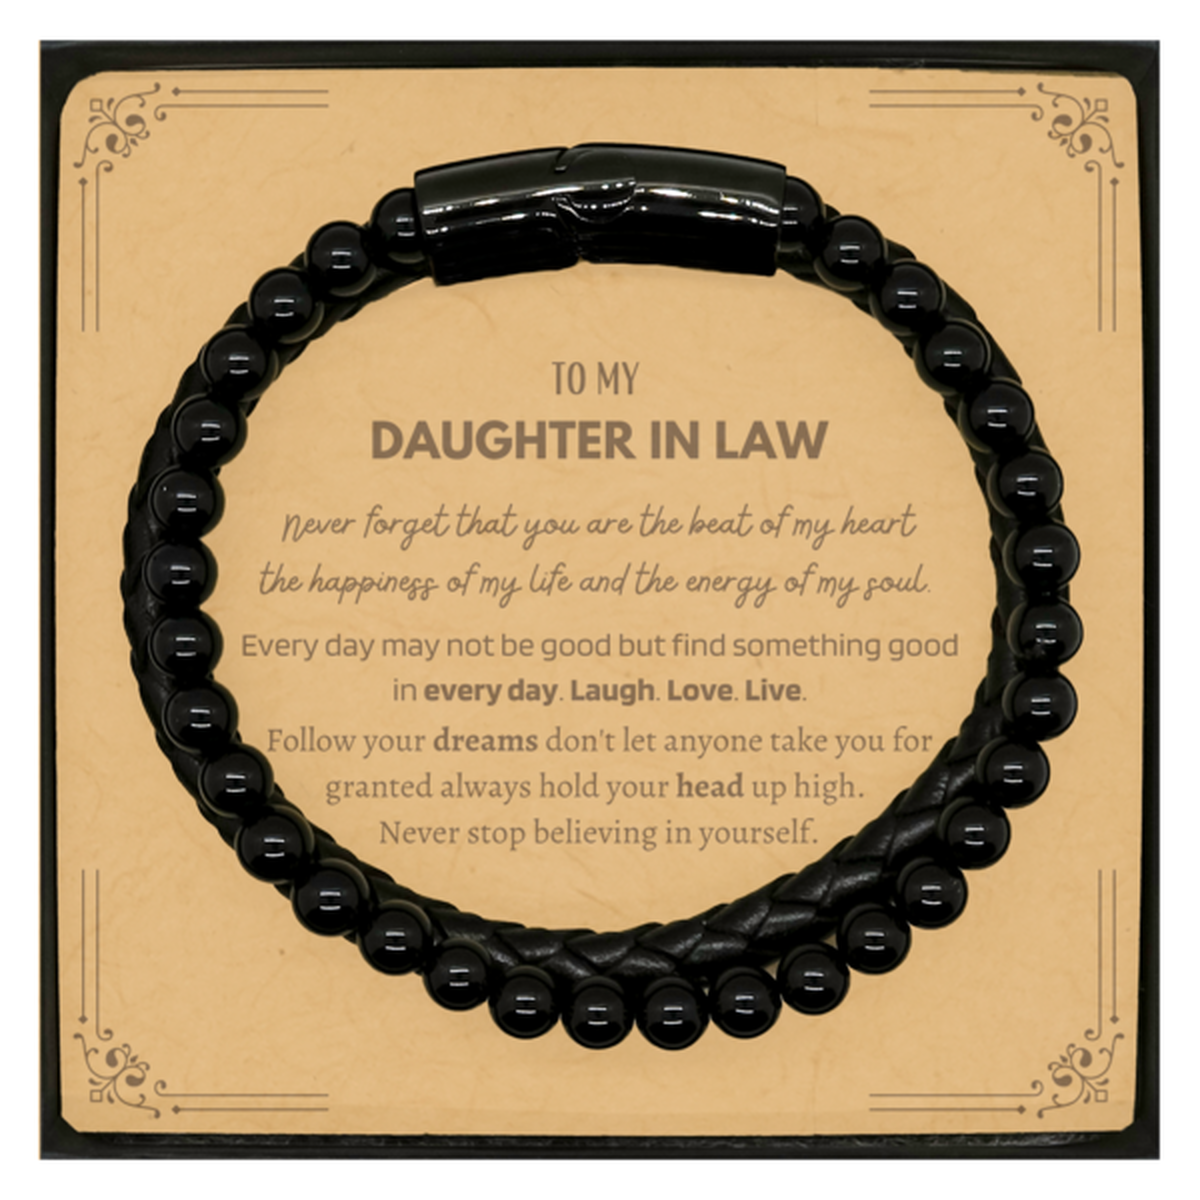 To My Daughter In Law Message Card Gifts, Christmas Daughter In Law Stone Leather Bracelets Present, Birthday Unique Motivational For Daughter In Law, To My Daughter In Law Never forget that you are the beat of my heart the happiness of my life and the en